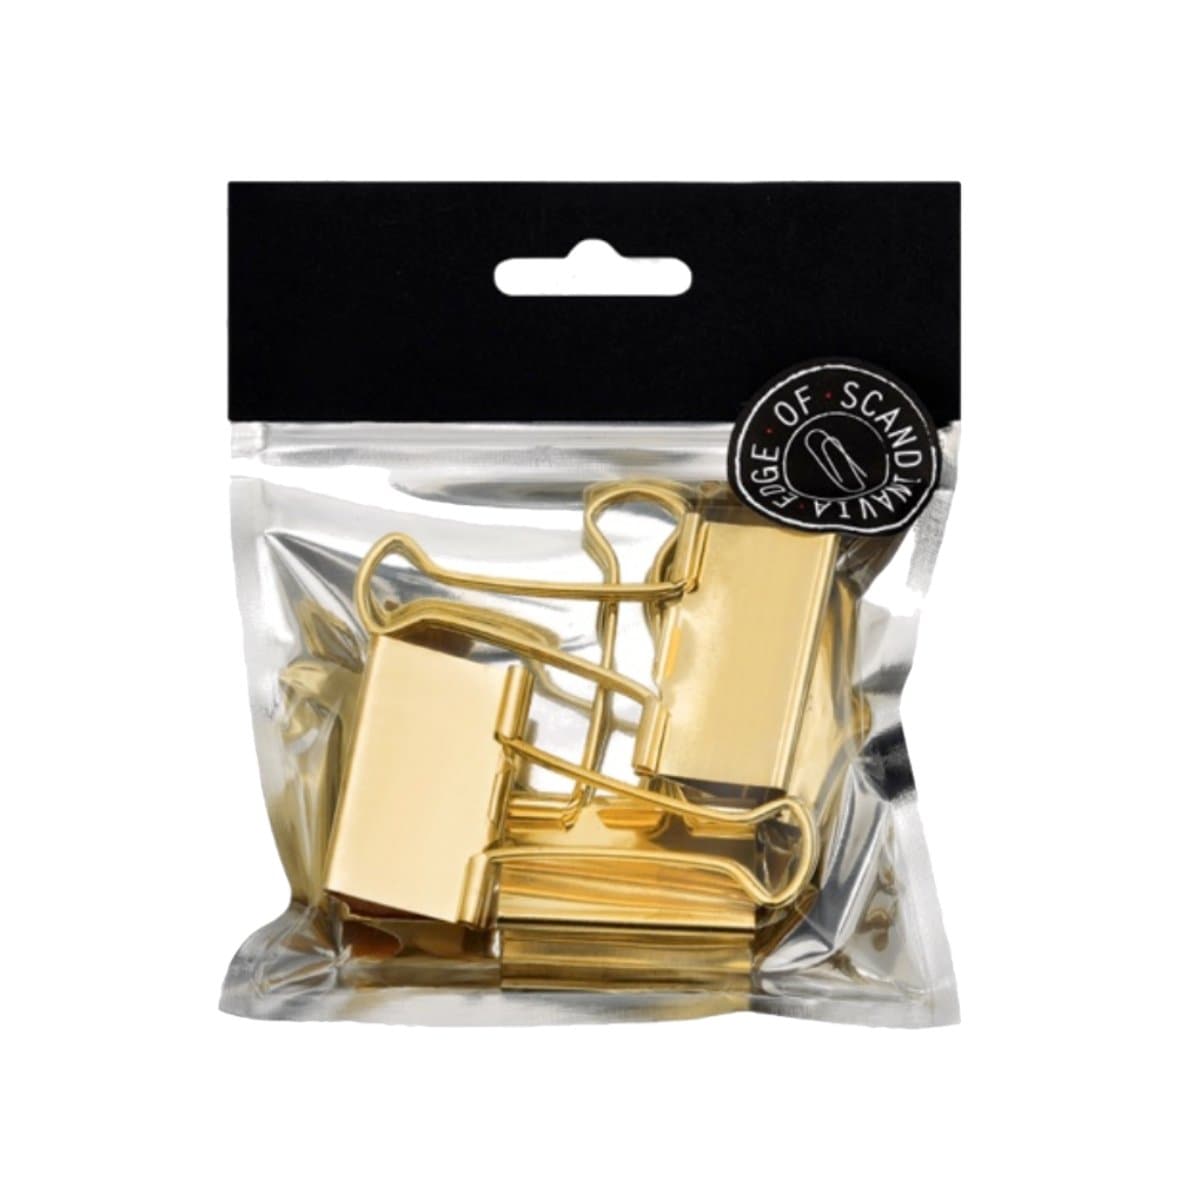 EDGE Binder Clips, 41mm, 3/pack, Brass-Plated